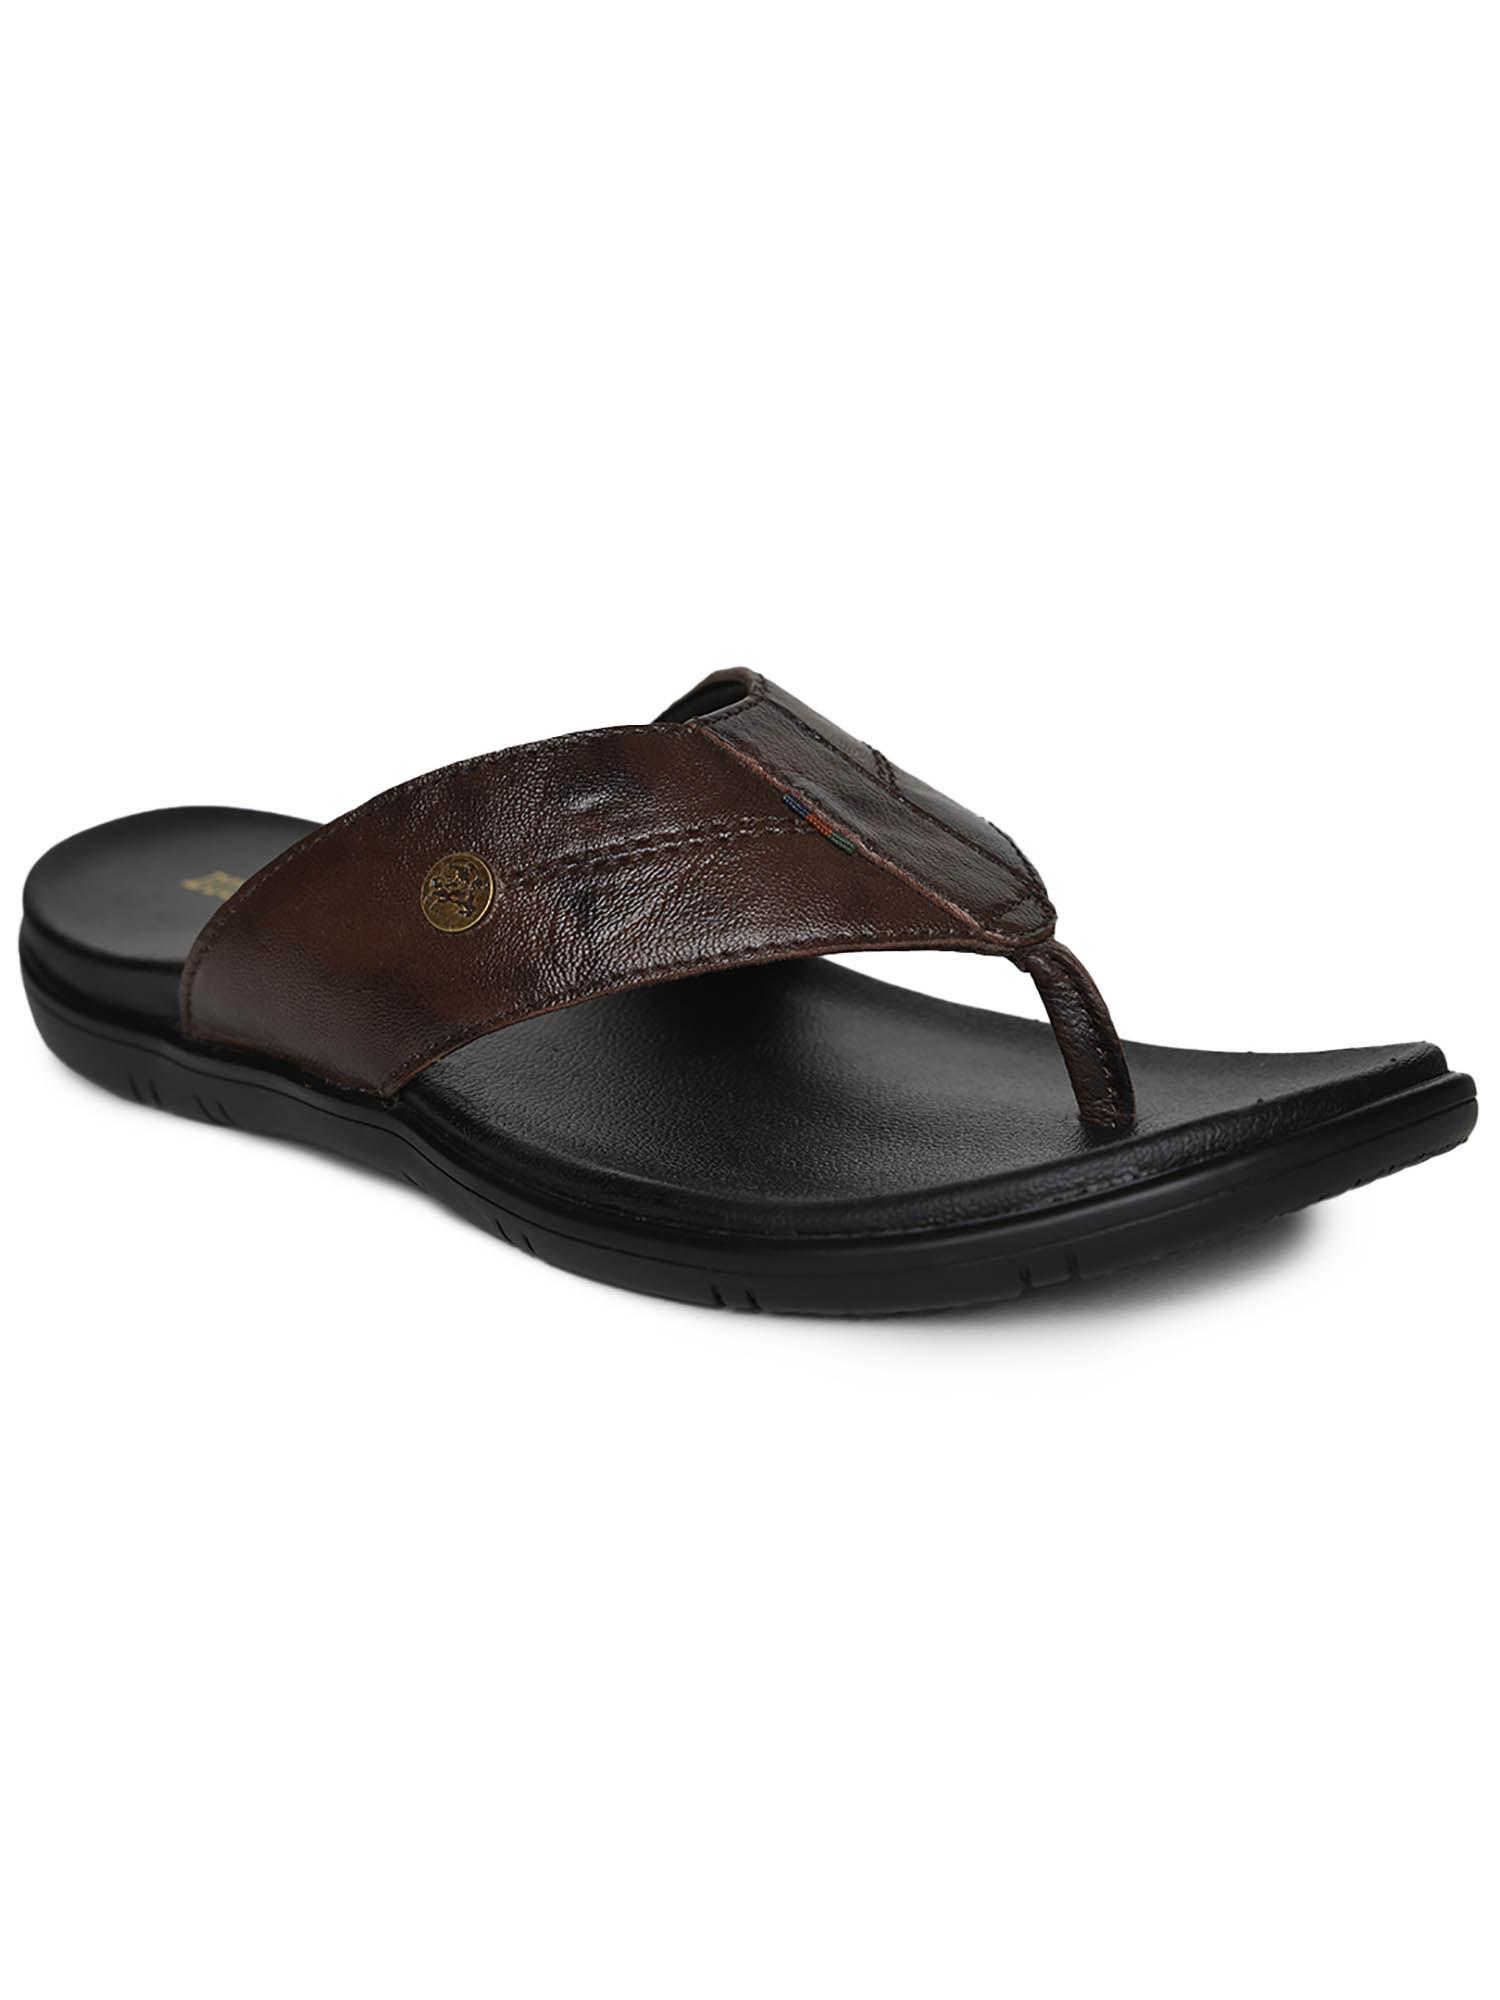 sando full grain natural leather casual sandals for mens